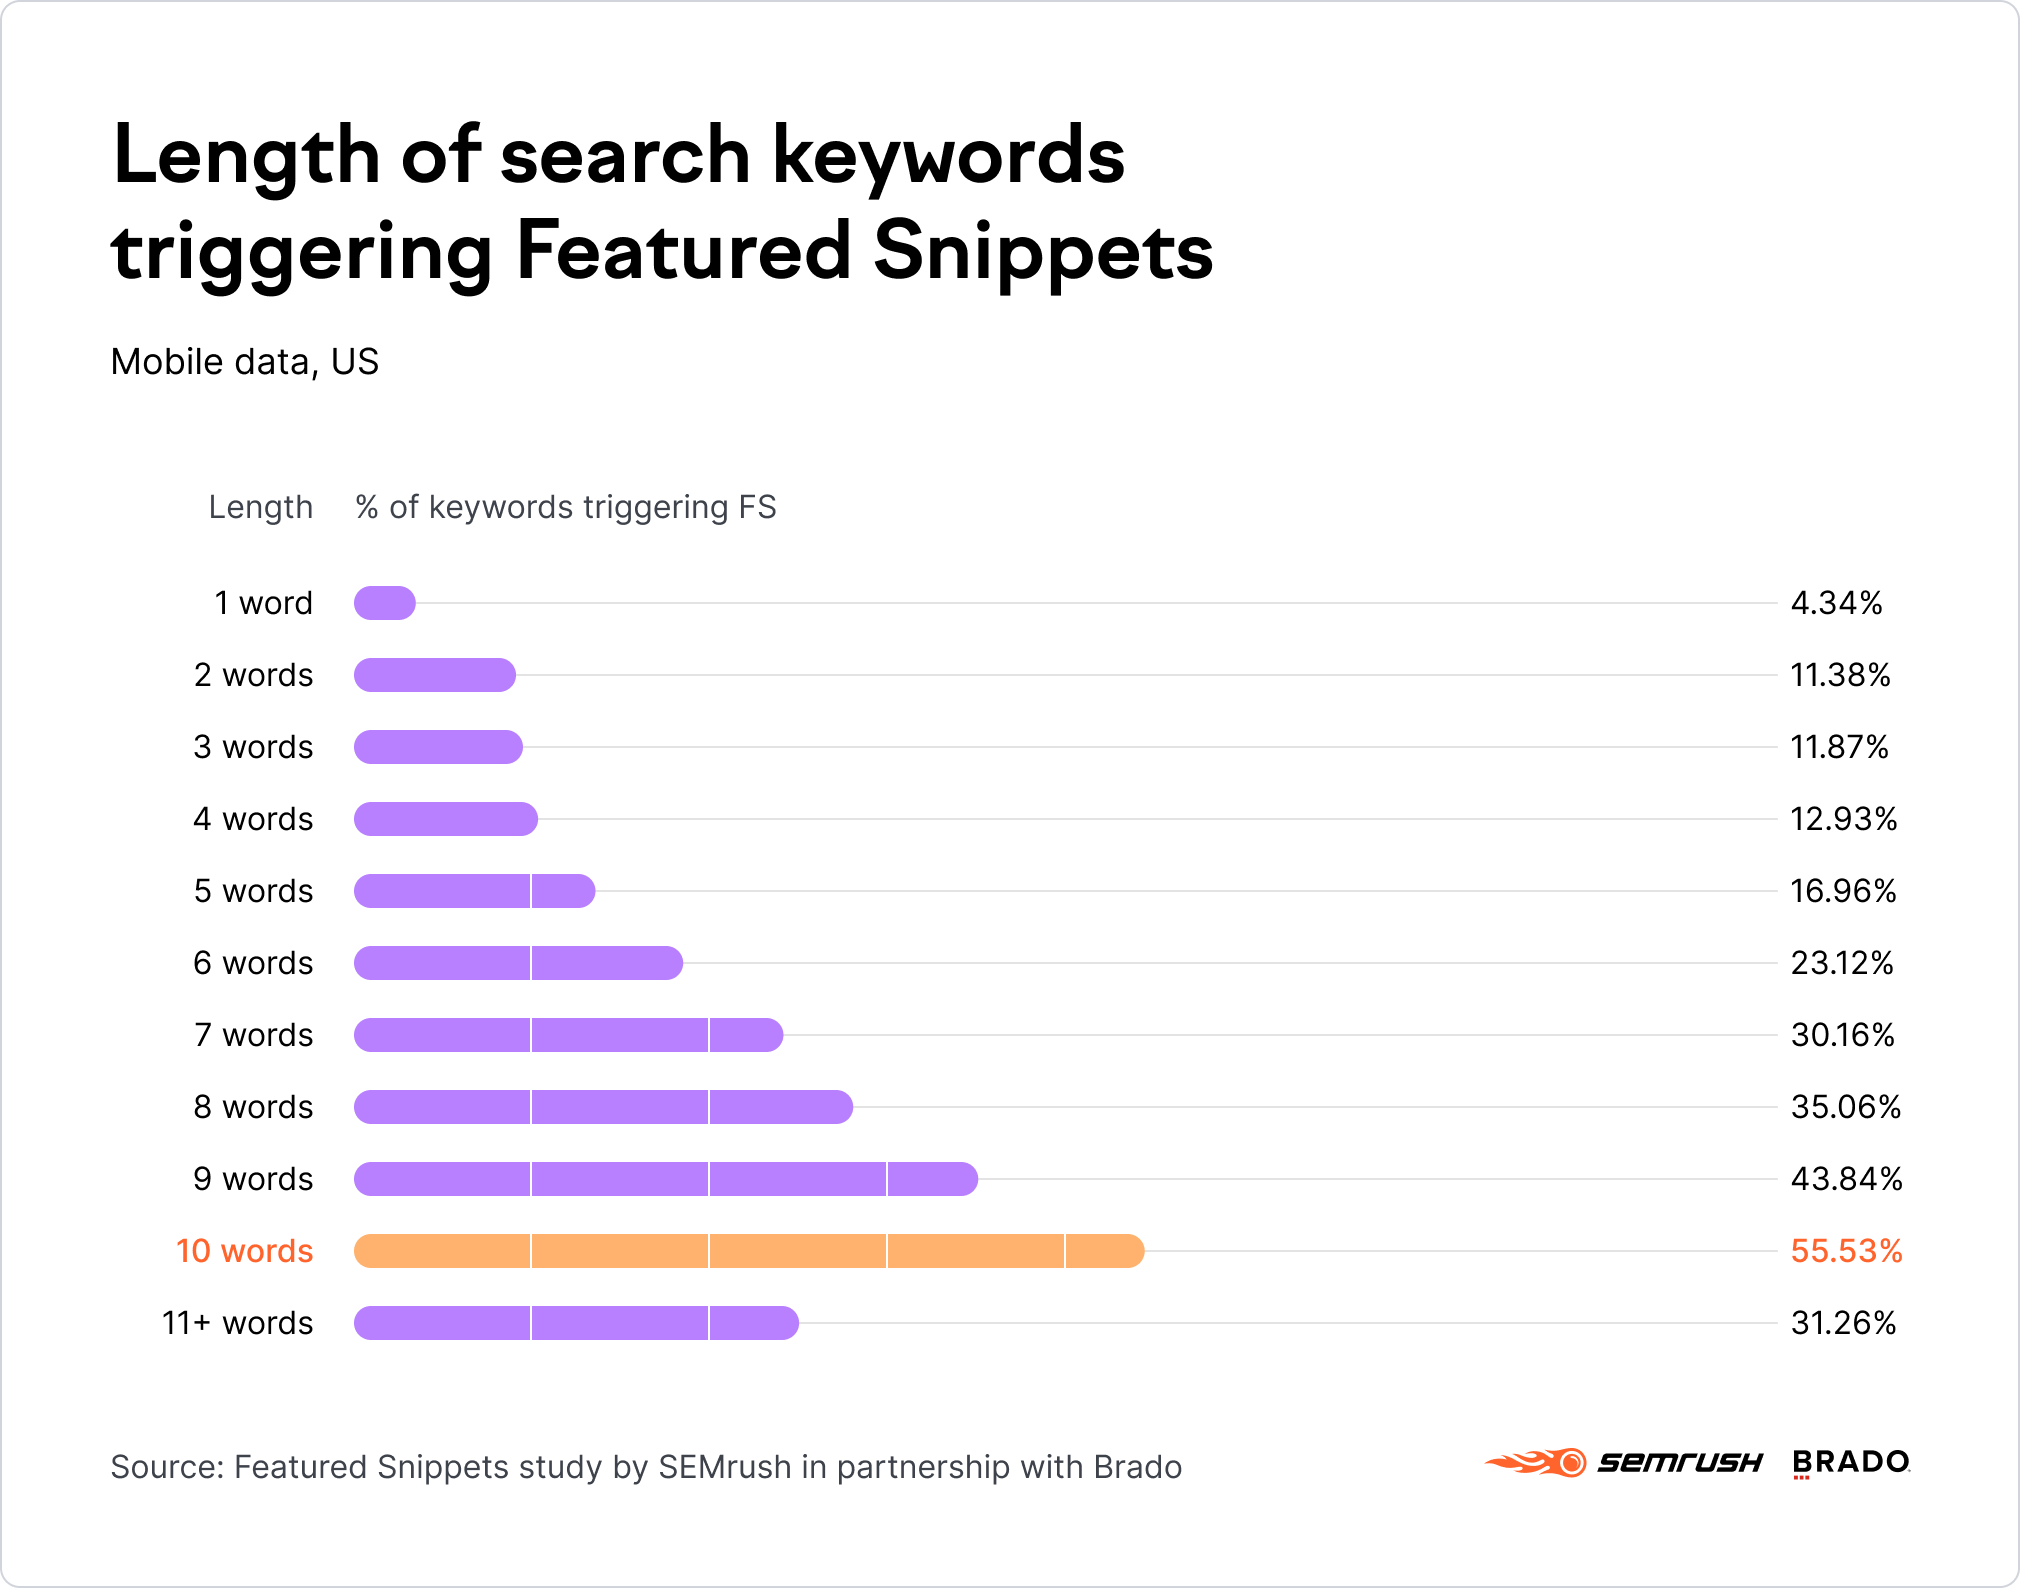 Length of search keywords triggering featured snippets